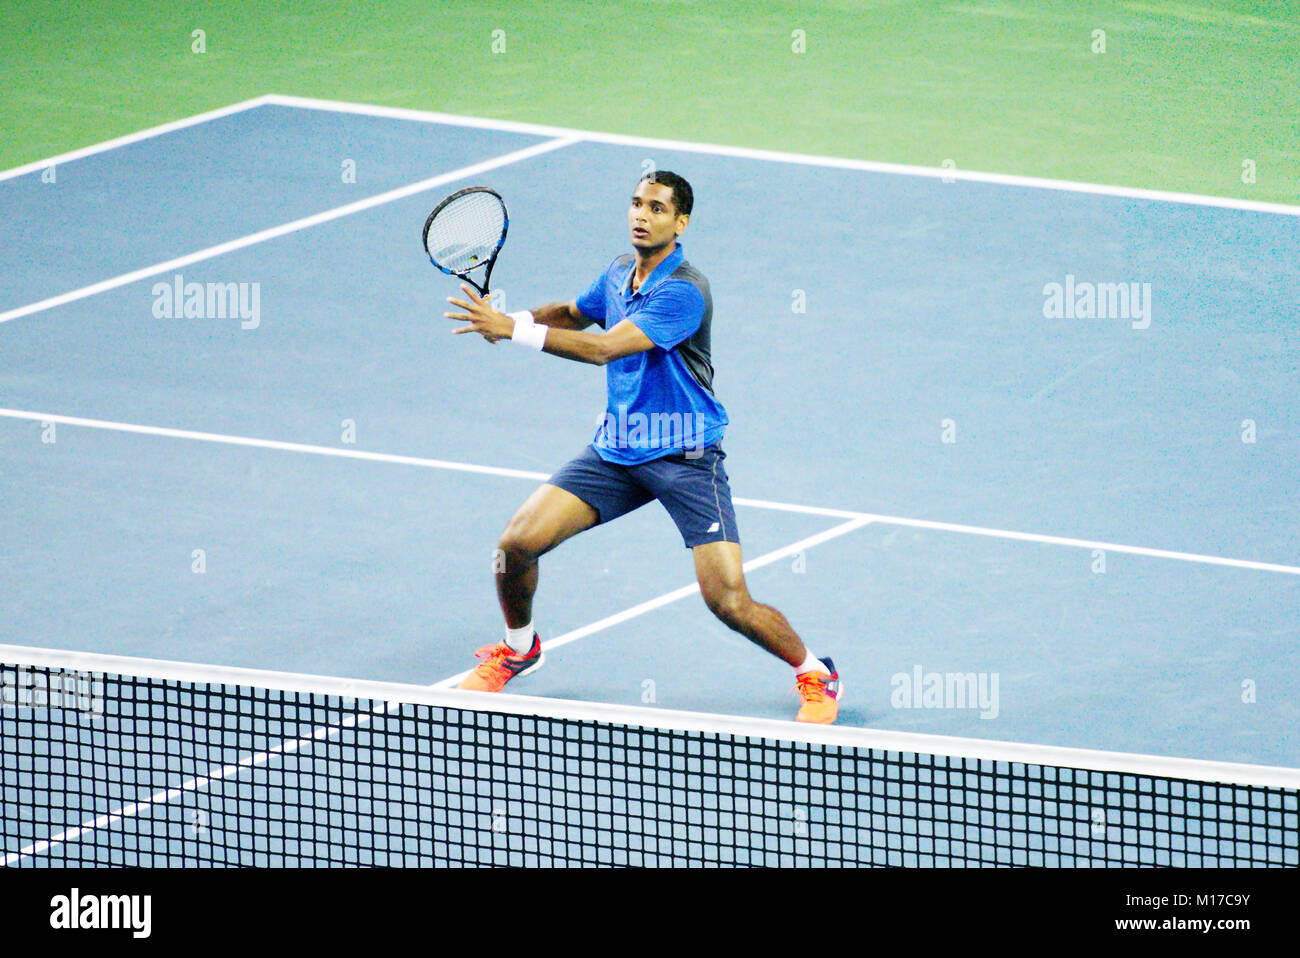 Pune, India. 1st January 2018. Ramakumar Ramanathan of India, in action in the first round of Tata Open Maharashtra Tennis tournament. Stock Photo